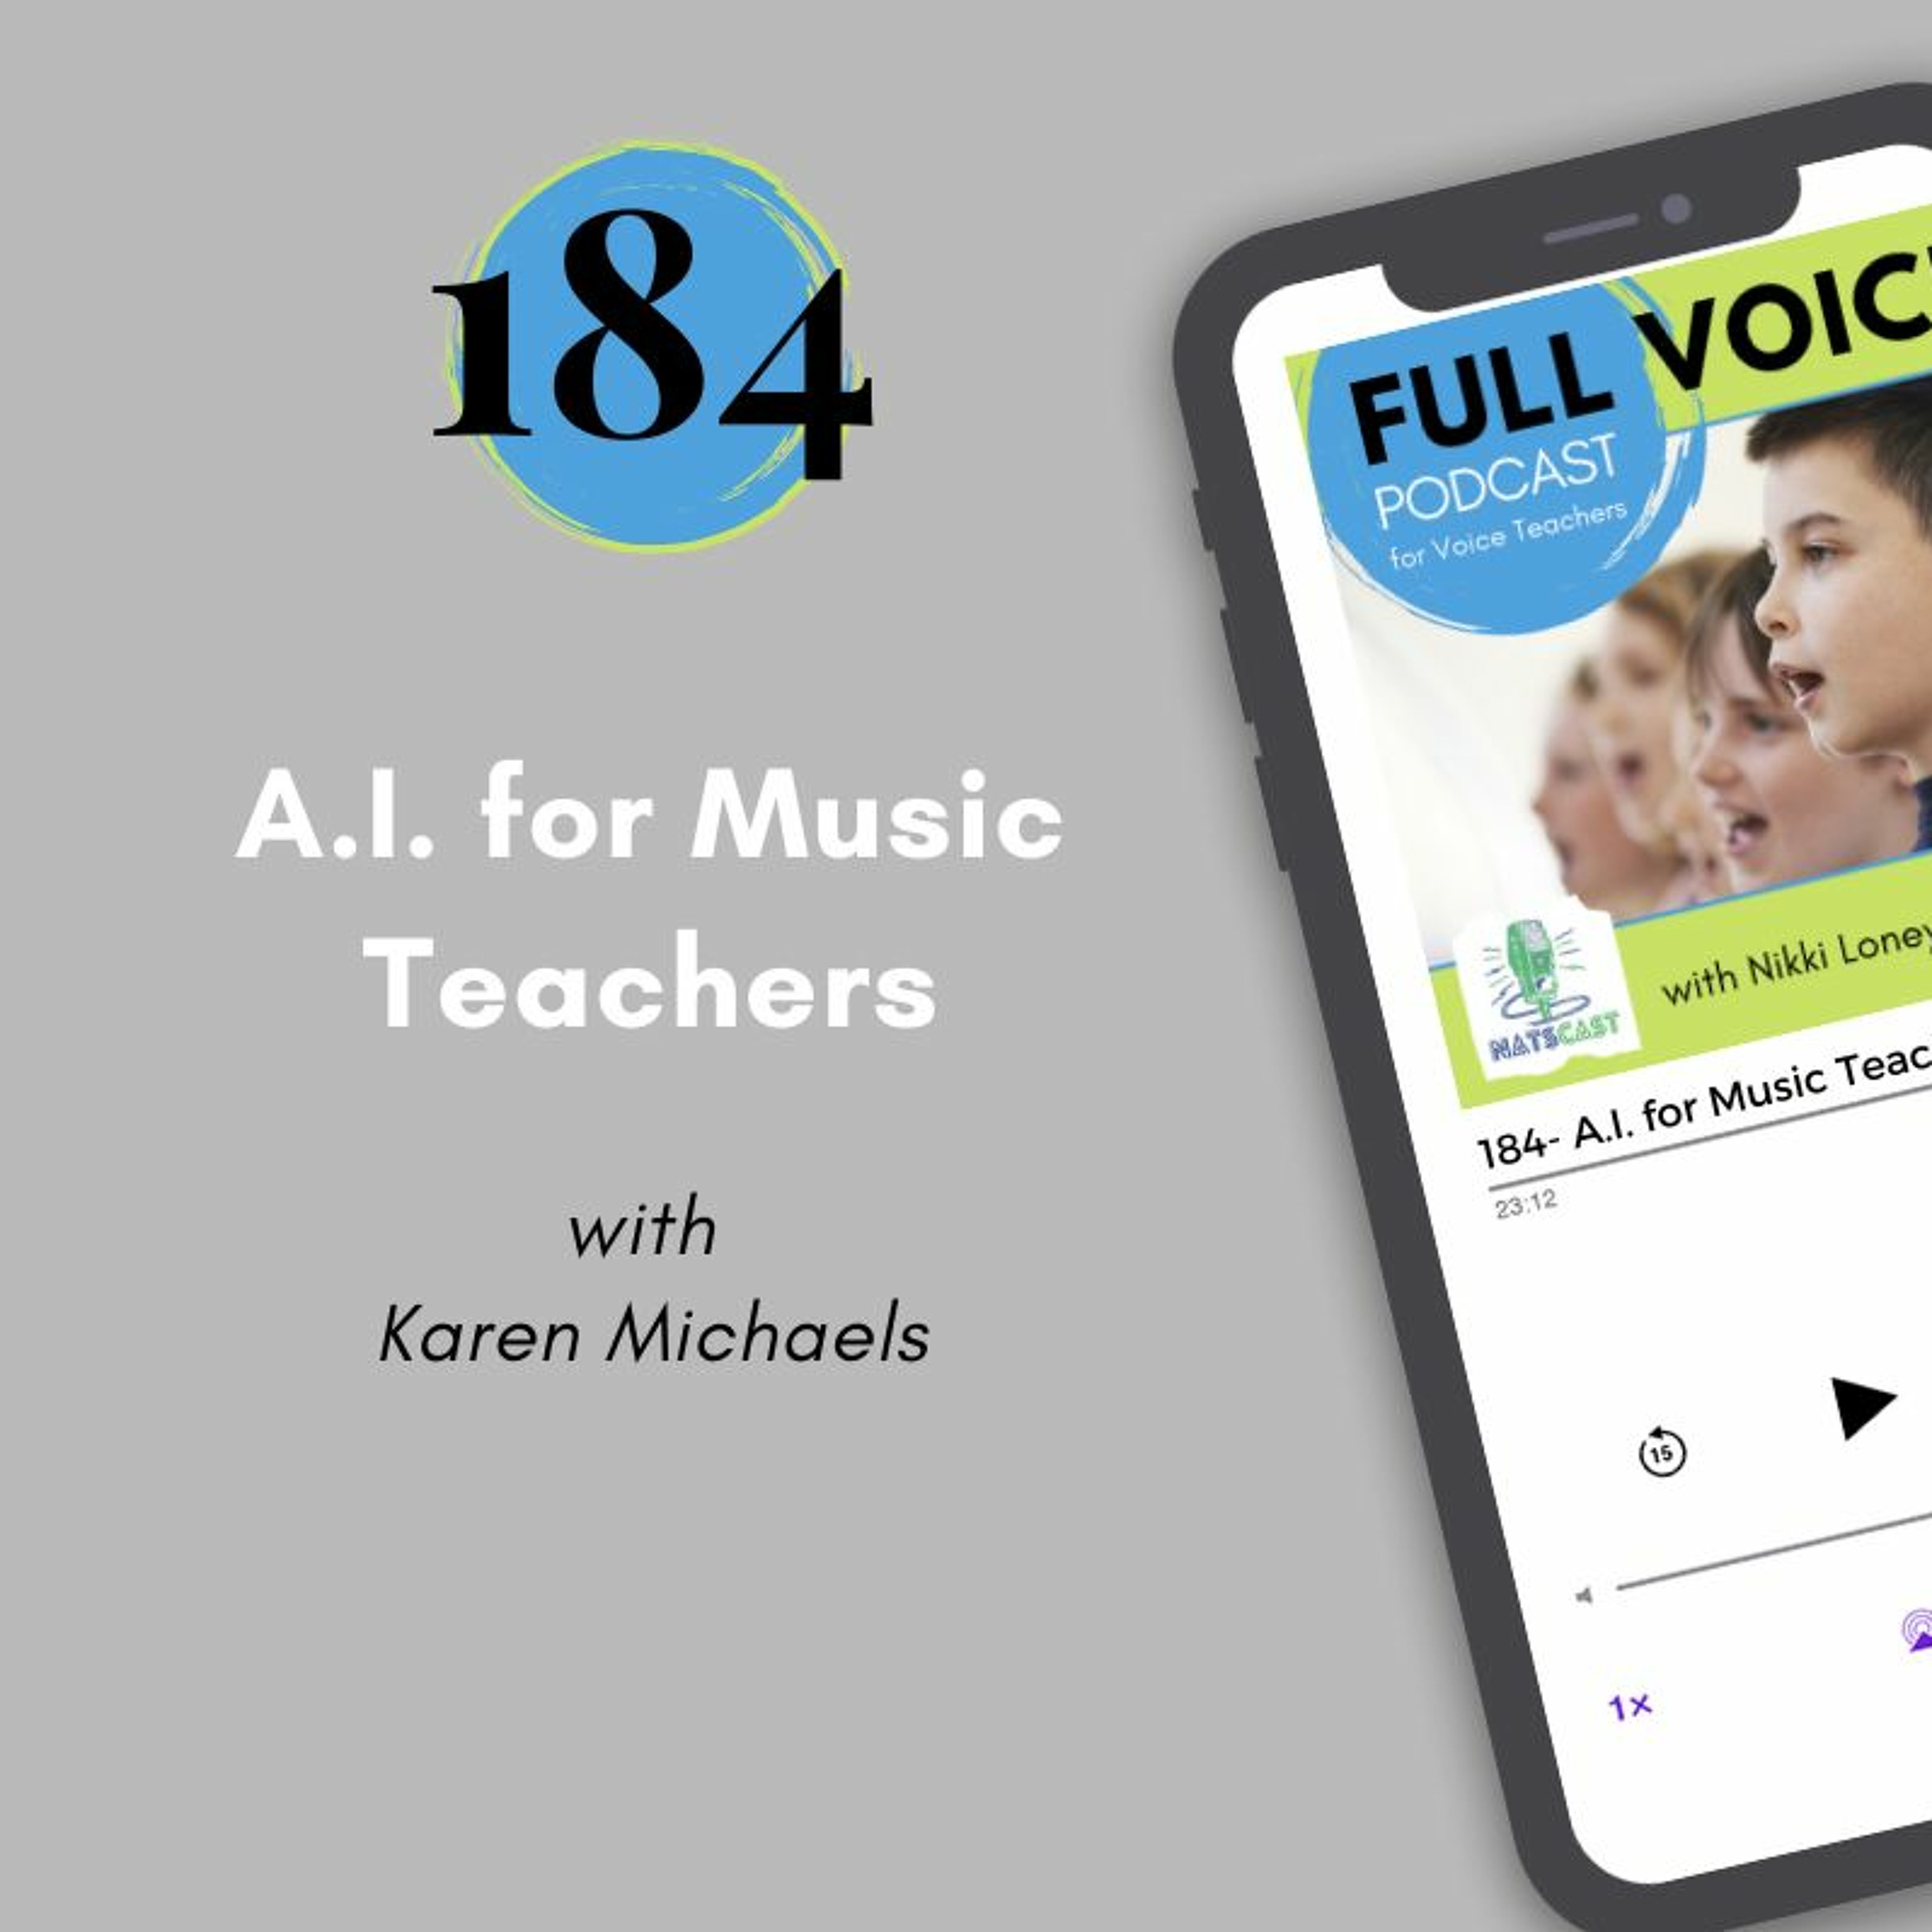 FVPC #184 A.I. for Music Teachers with Karen Michaels